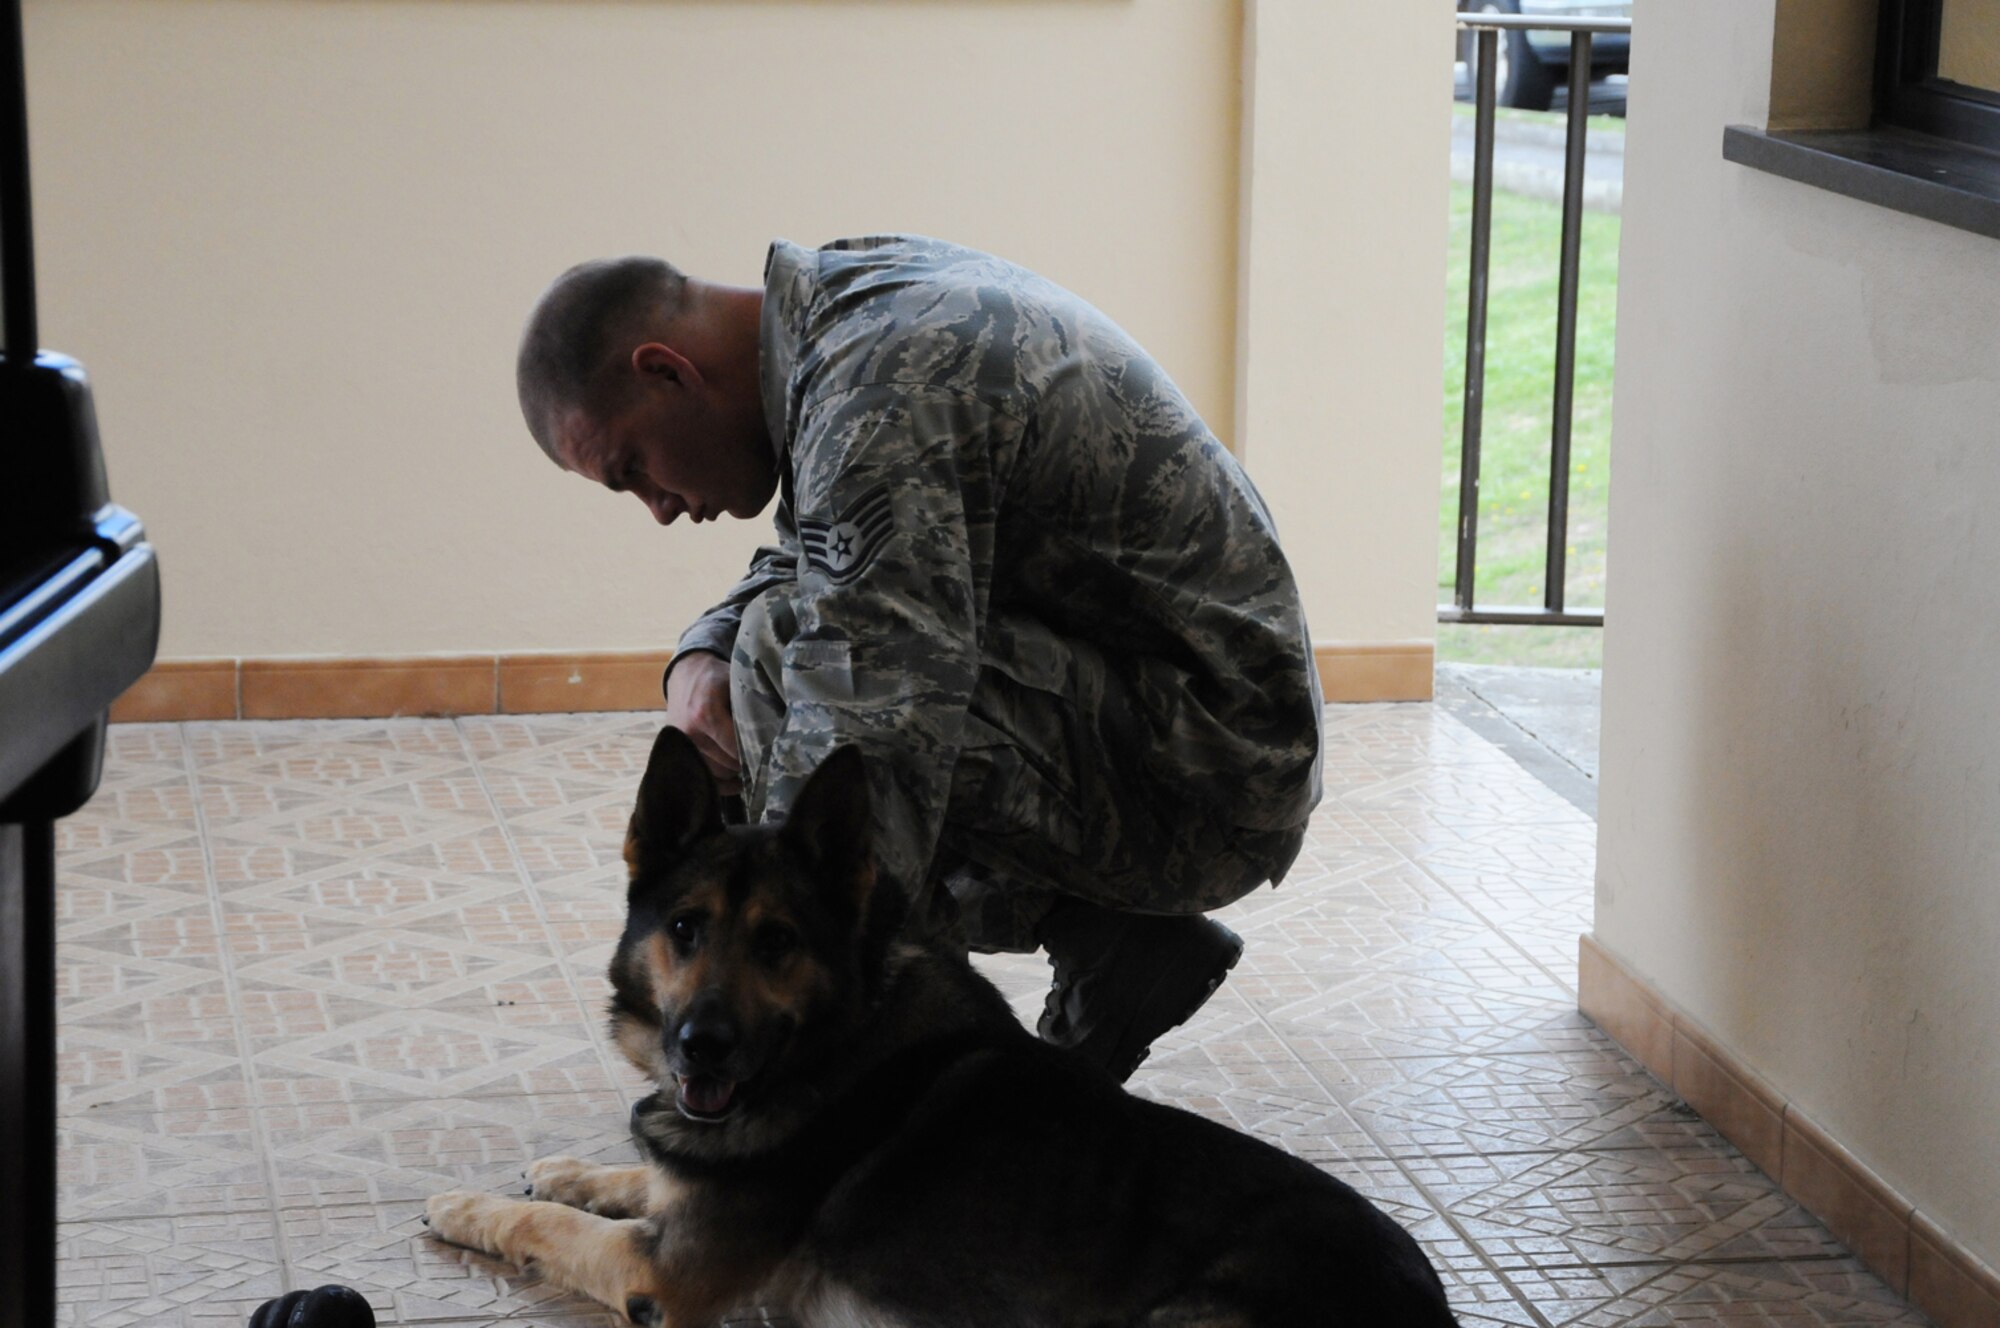 Staff Sgt. Joshua Rose and his dog, Dan, 65th Security Forces Squadron, take a moment during the memorial service in honor of Senior Airman Amber Finnel, 65th SFS, at Lajes Field July 2. Airman Finnell was from East Tawas, Mich. and entered the Air Force in Feb. 2004.  She had been previously stationed at Minot AFB, N.D. and Sather AB, Baghdad, Iraq; she passed away on June 30, 2009.  (U.S. Air Force photo by Tech Sgt. Rebecca F. Corey)